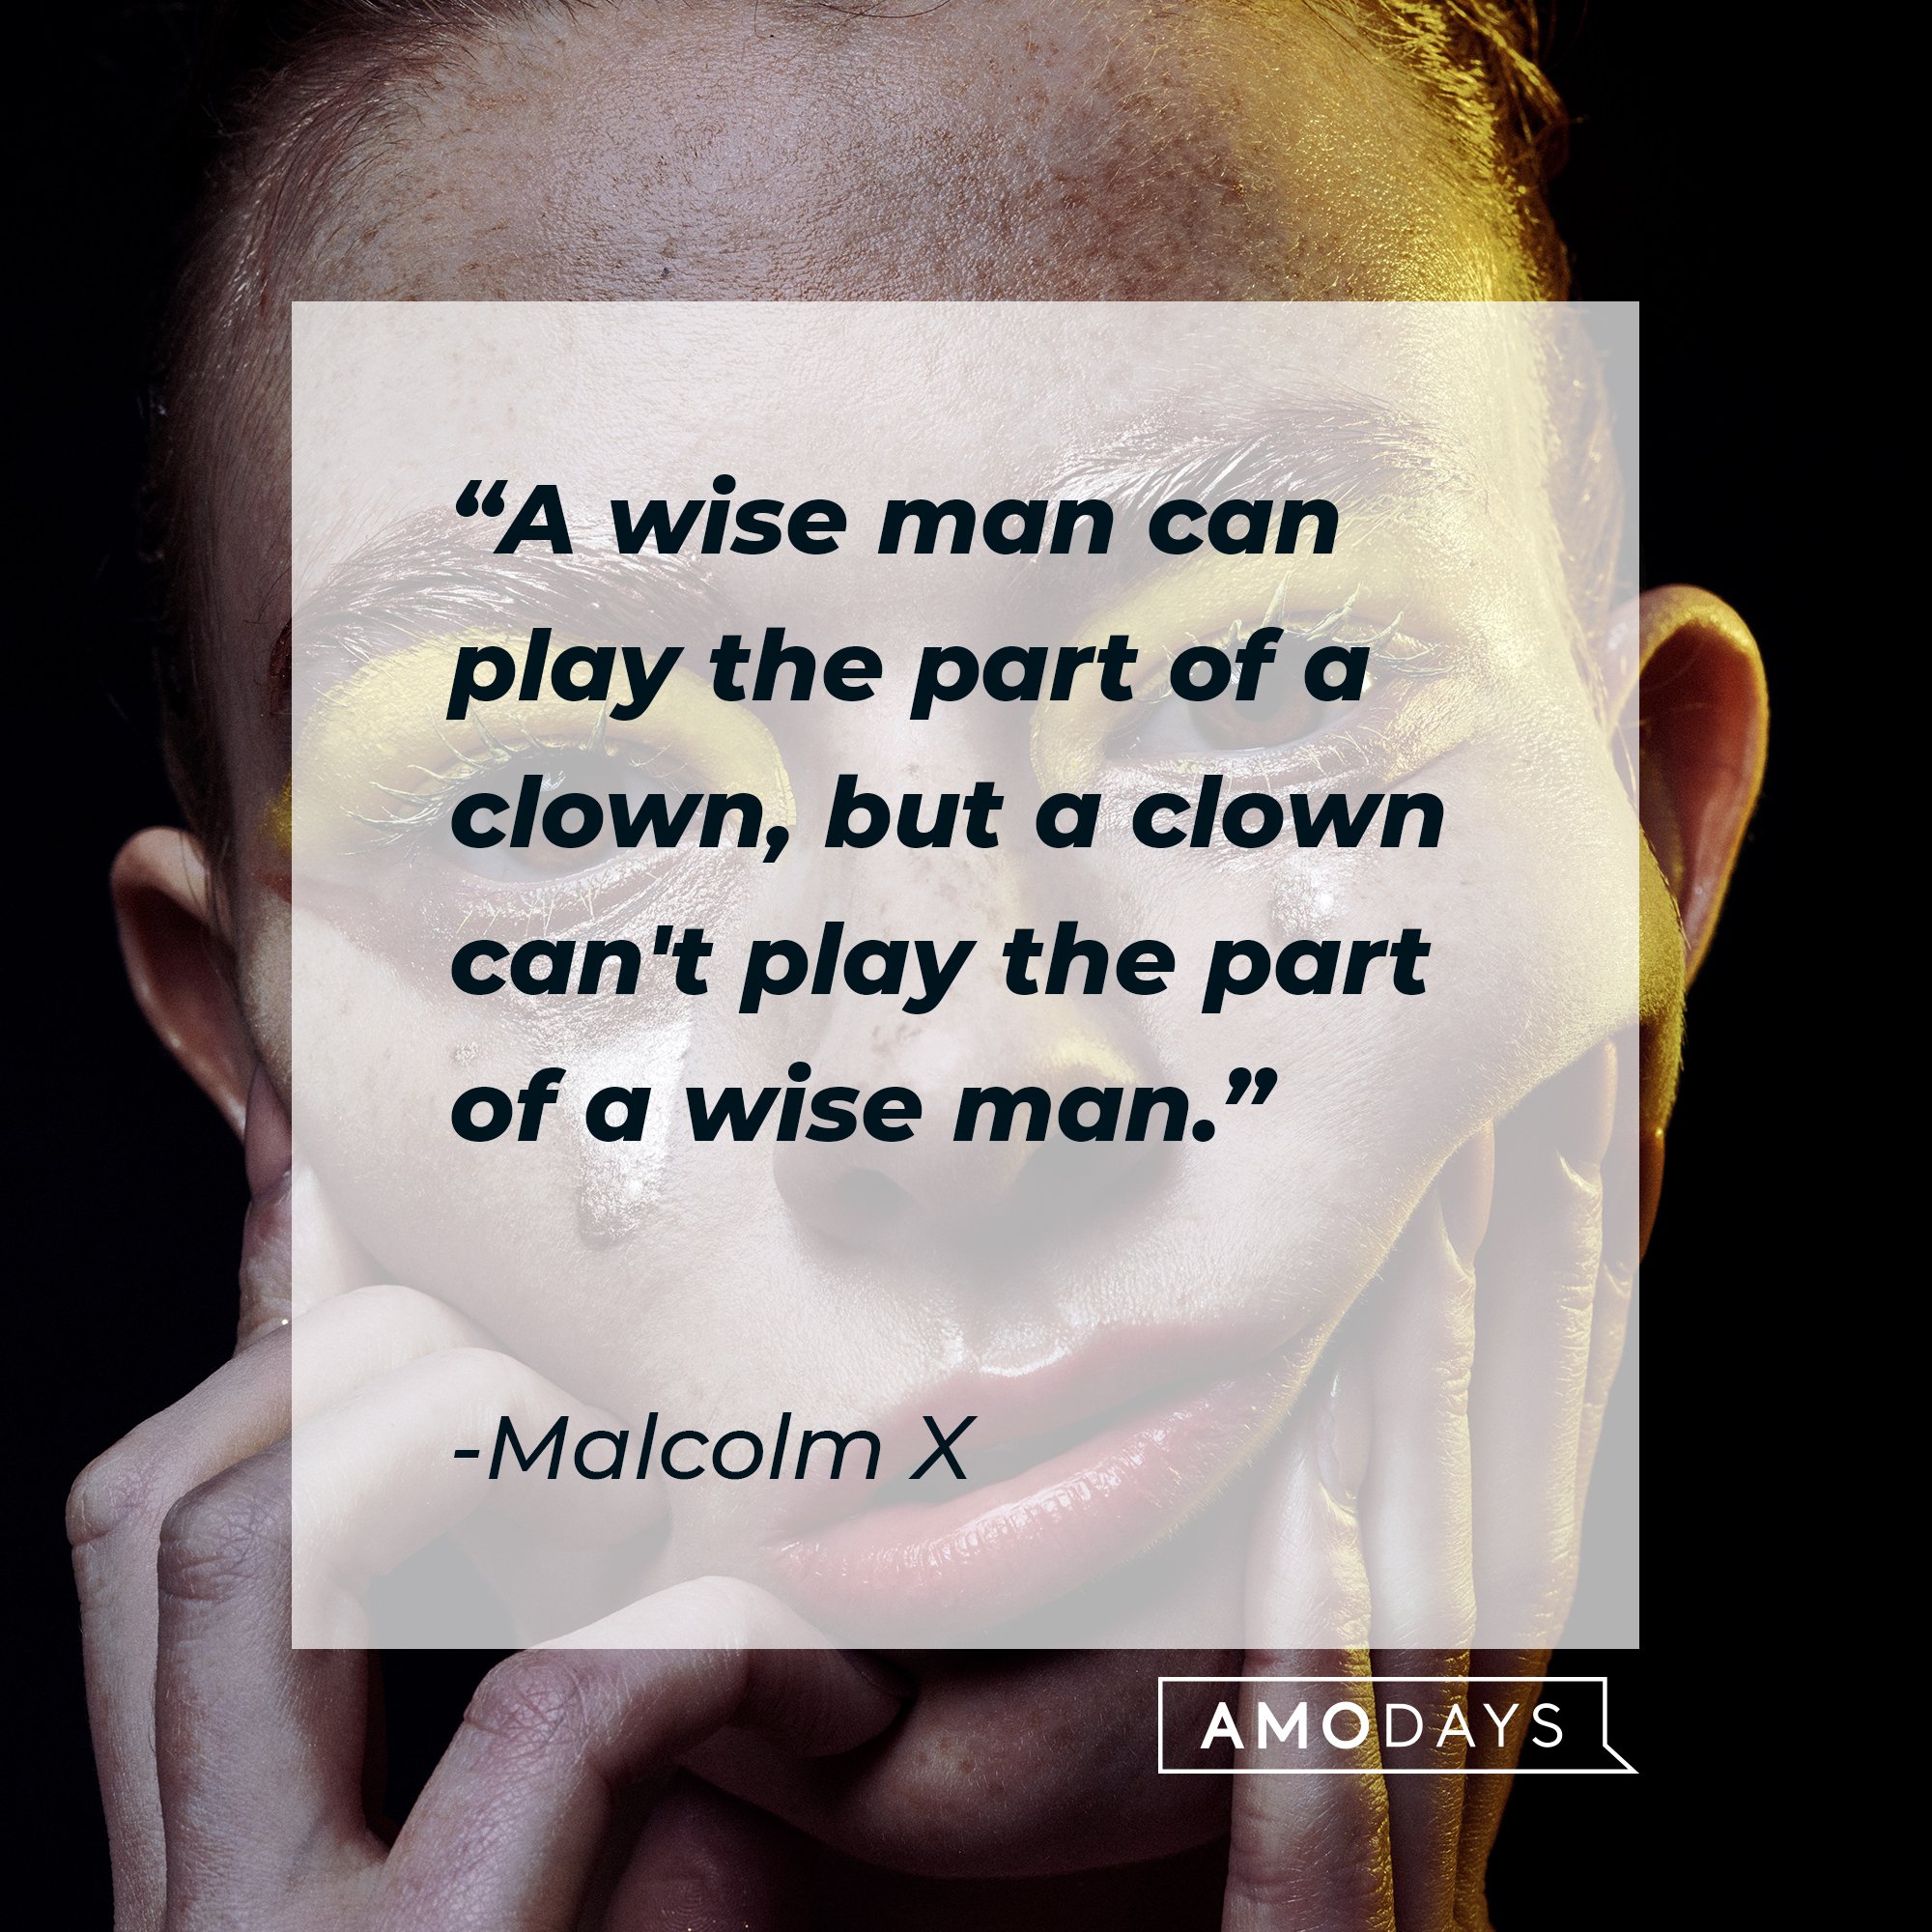 Malcolm X's quote "A wise man can play the part of a clown, but a clown can't play the part of a wise man." | Source: Unsplash.com